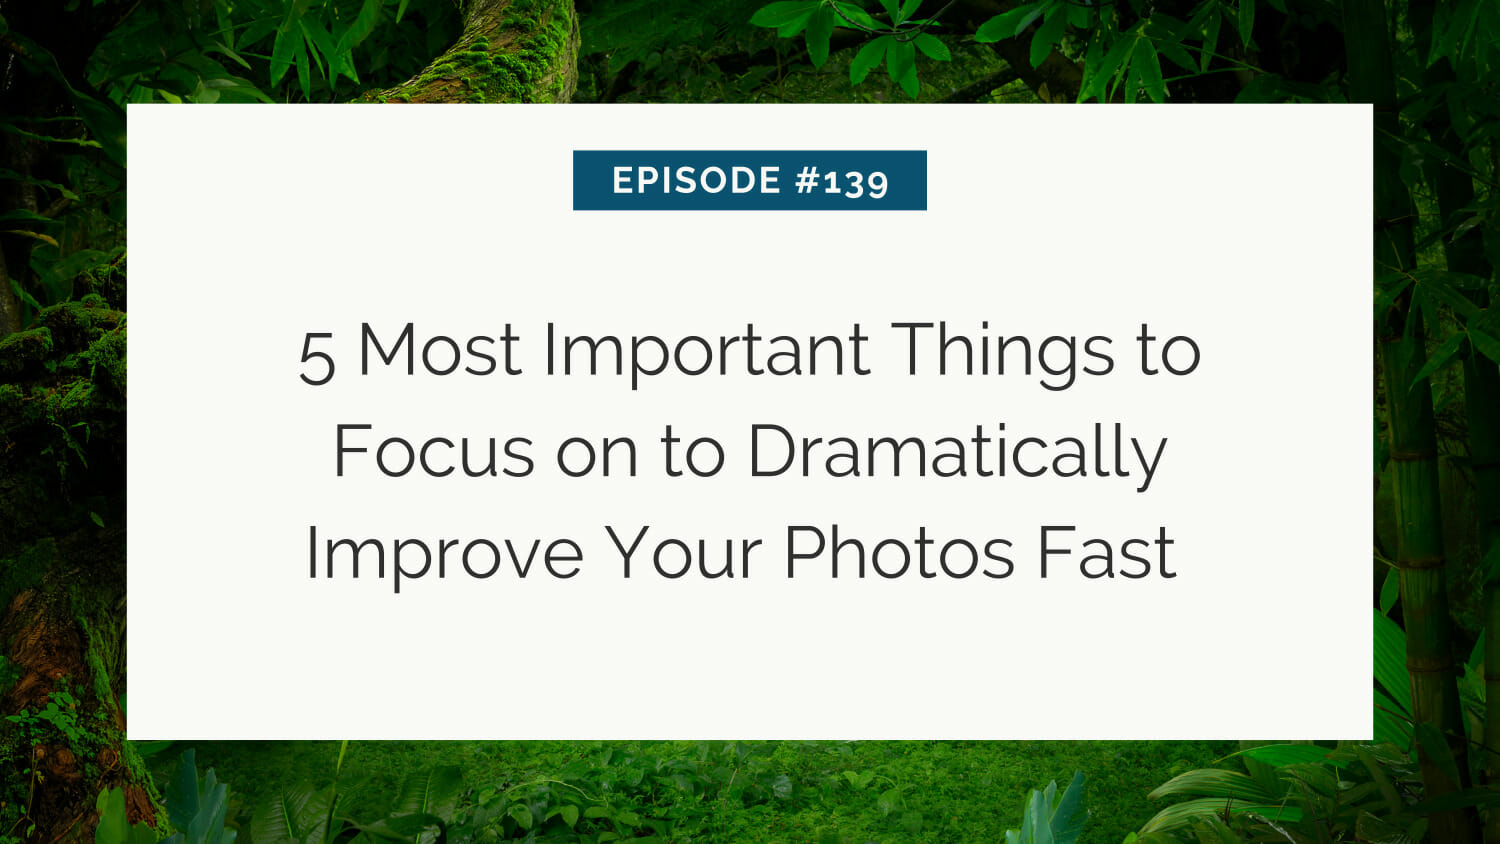 Title slide for episode #139 discussing '5 most important things to focus on to dramatically improve your photos fast' against a lush greenery backdrop.